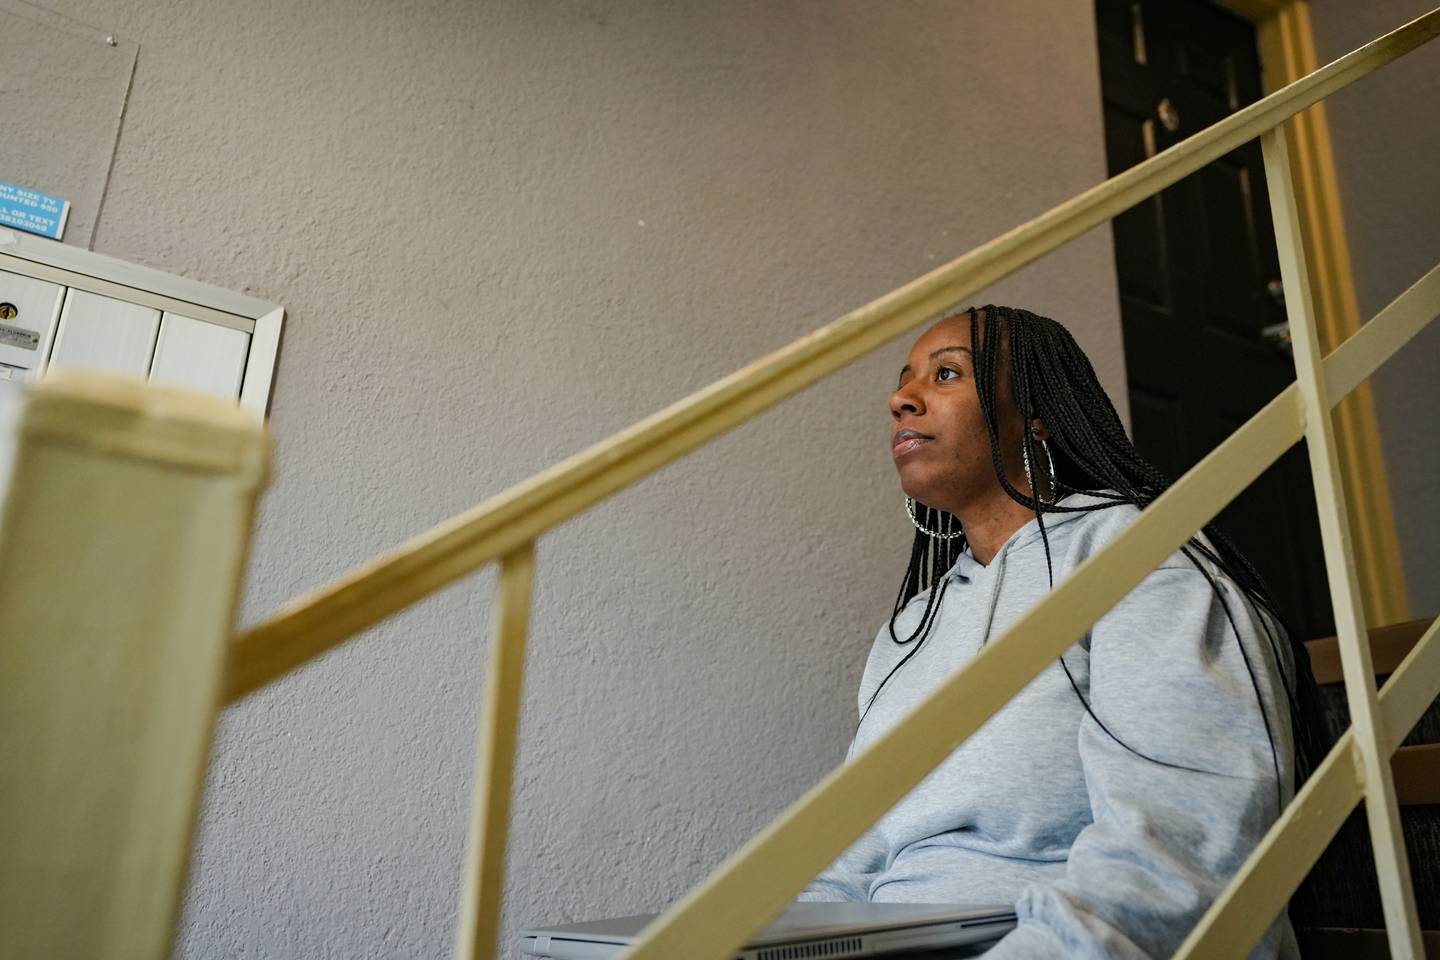 Dena Jackson has struggled with housing prospects on her journey to being a homeowner, ultimately worried about extending her lease any longer in her Mt. Pleasant apartment in Baltimore Md. on February 27, 2023.